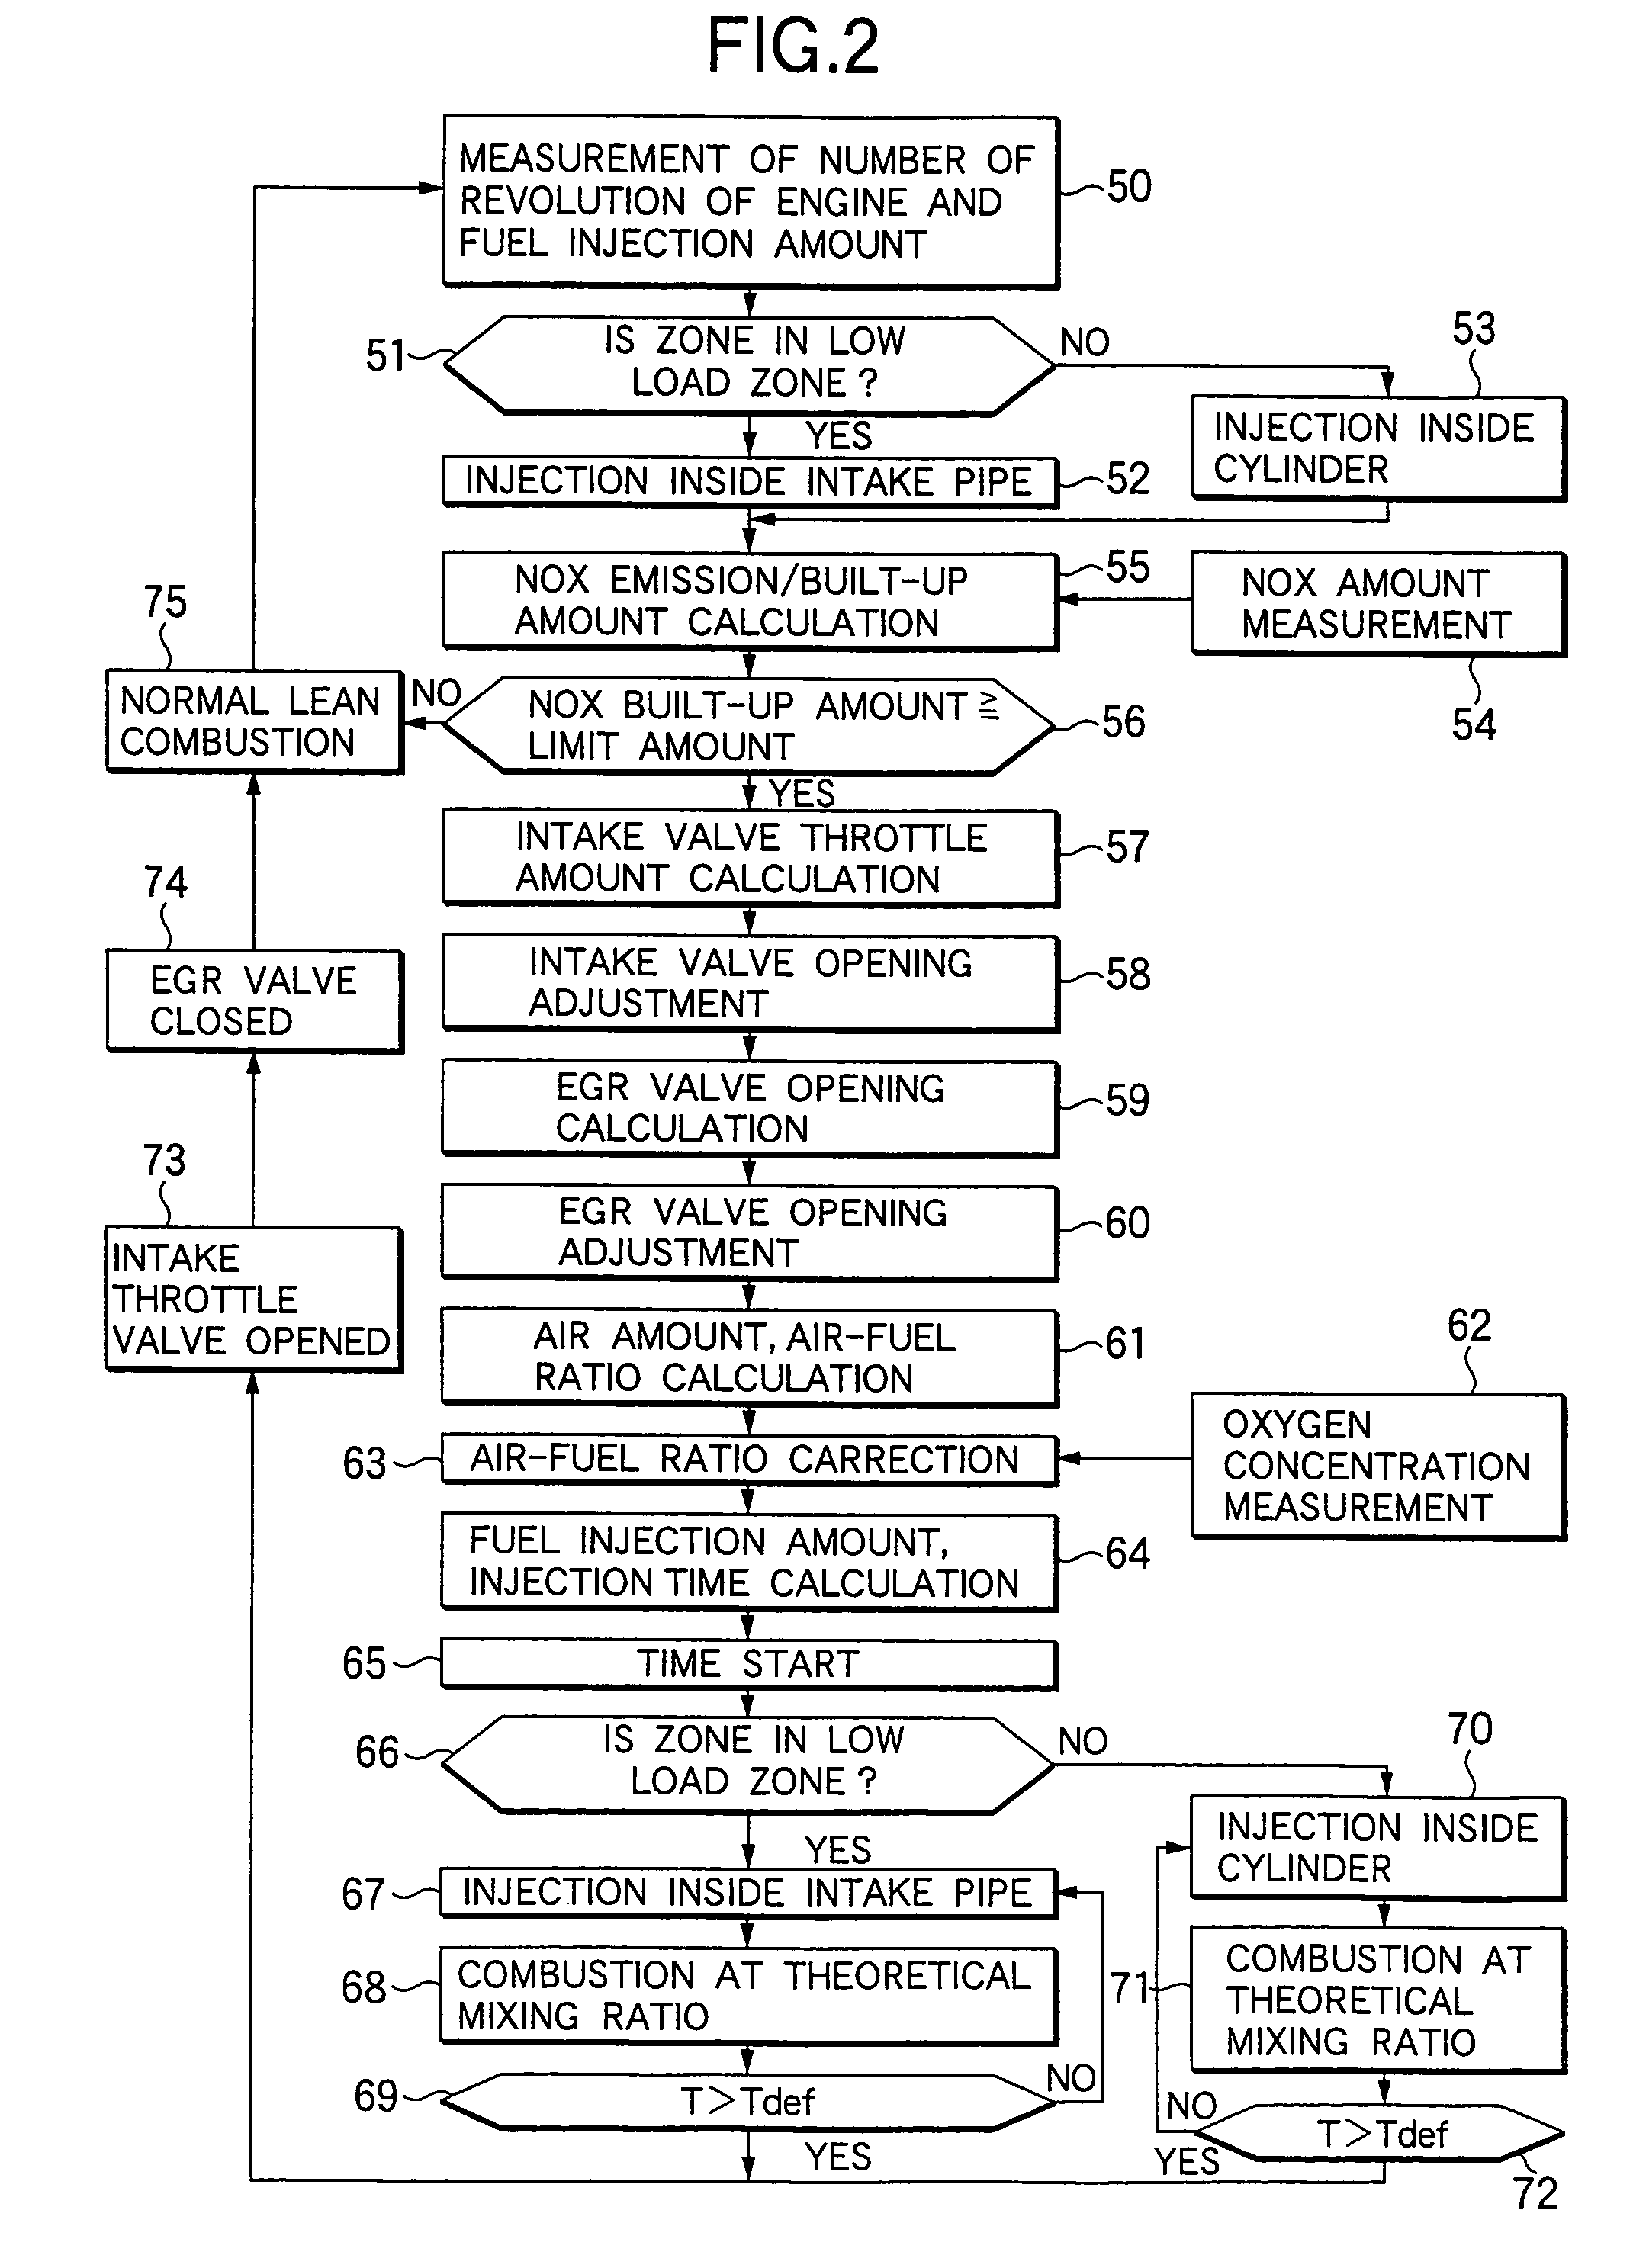 Fuel injection controlling apparatus for engine